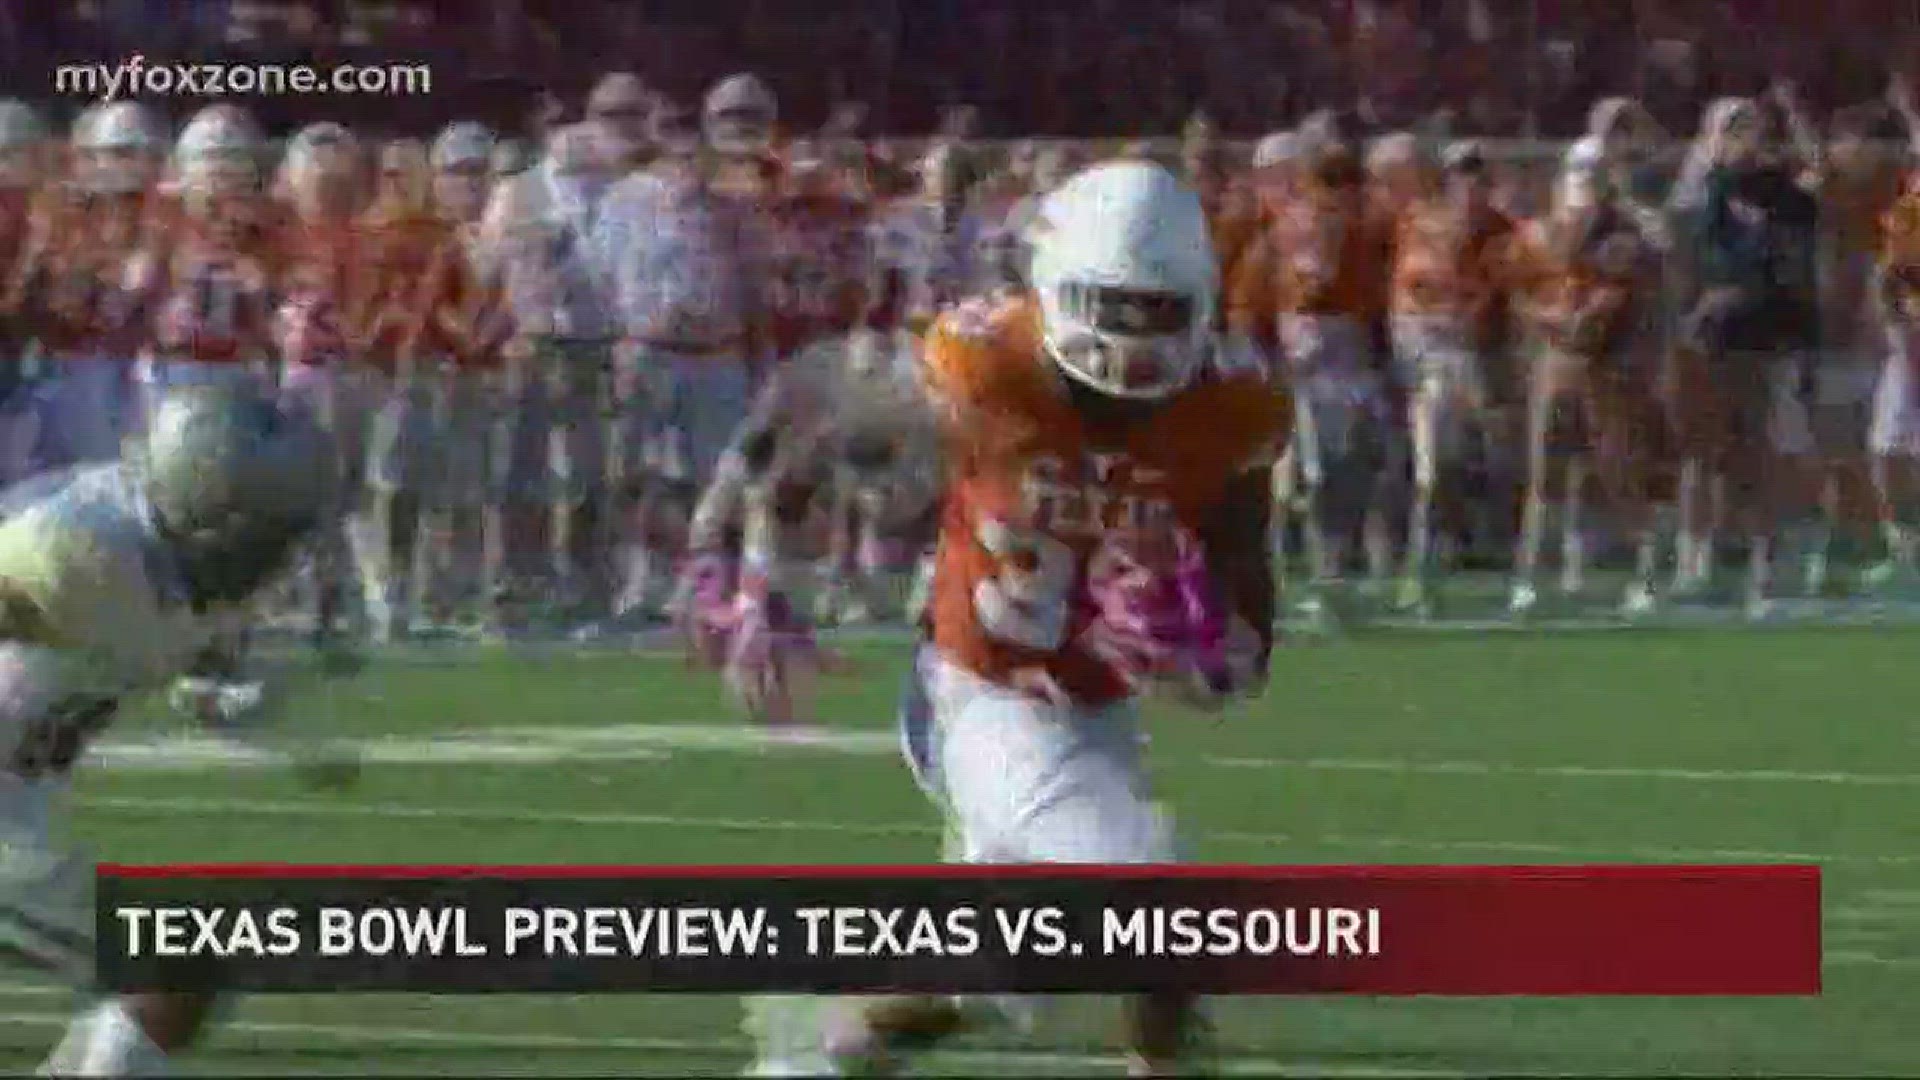 The Longhorns are about to take on the Missouri Tigers in the Academy Sports and Outdoors Texas Bowl. We previewed what you should expect from the matchup.